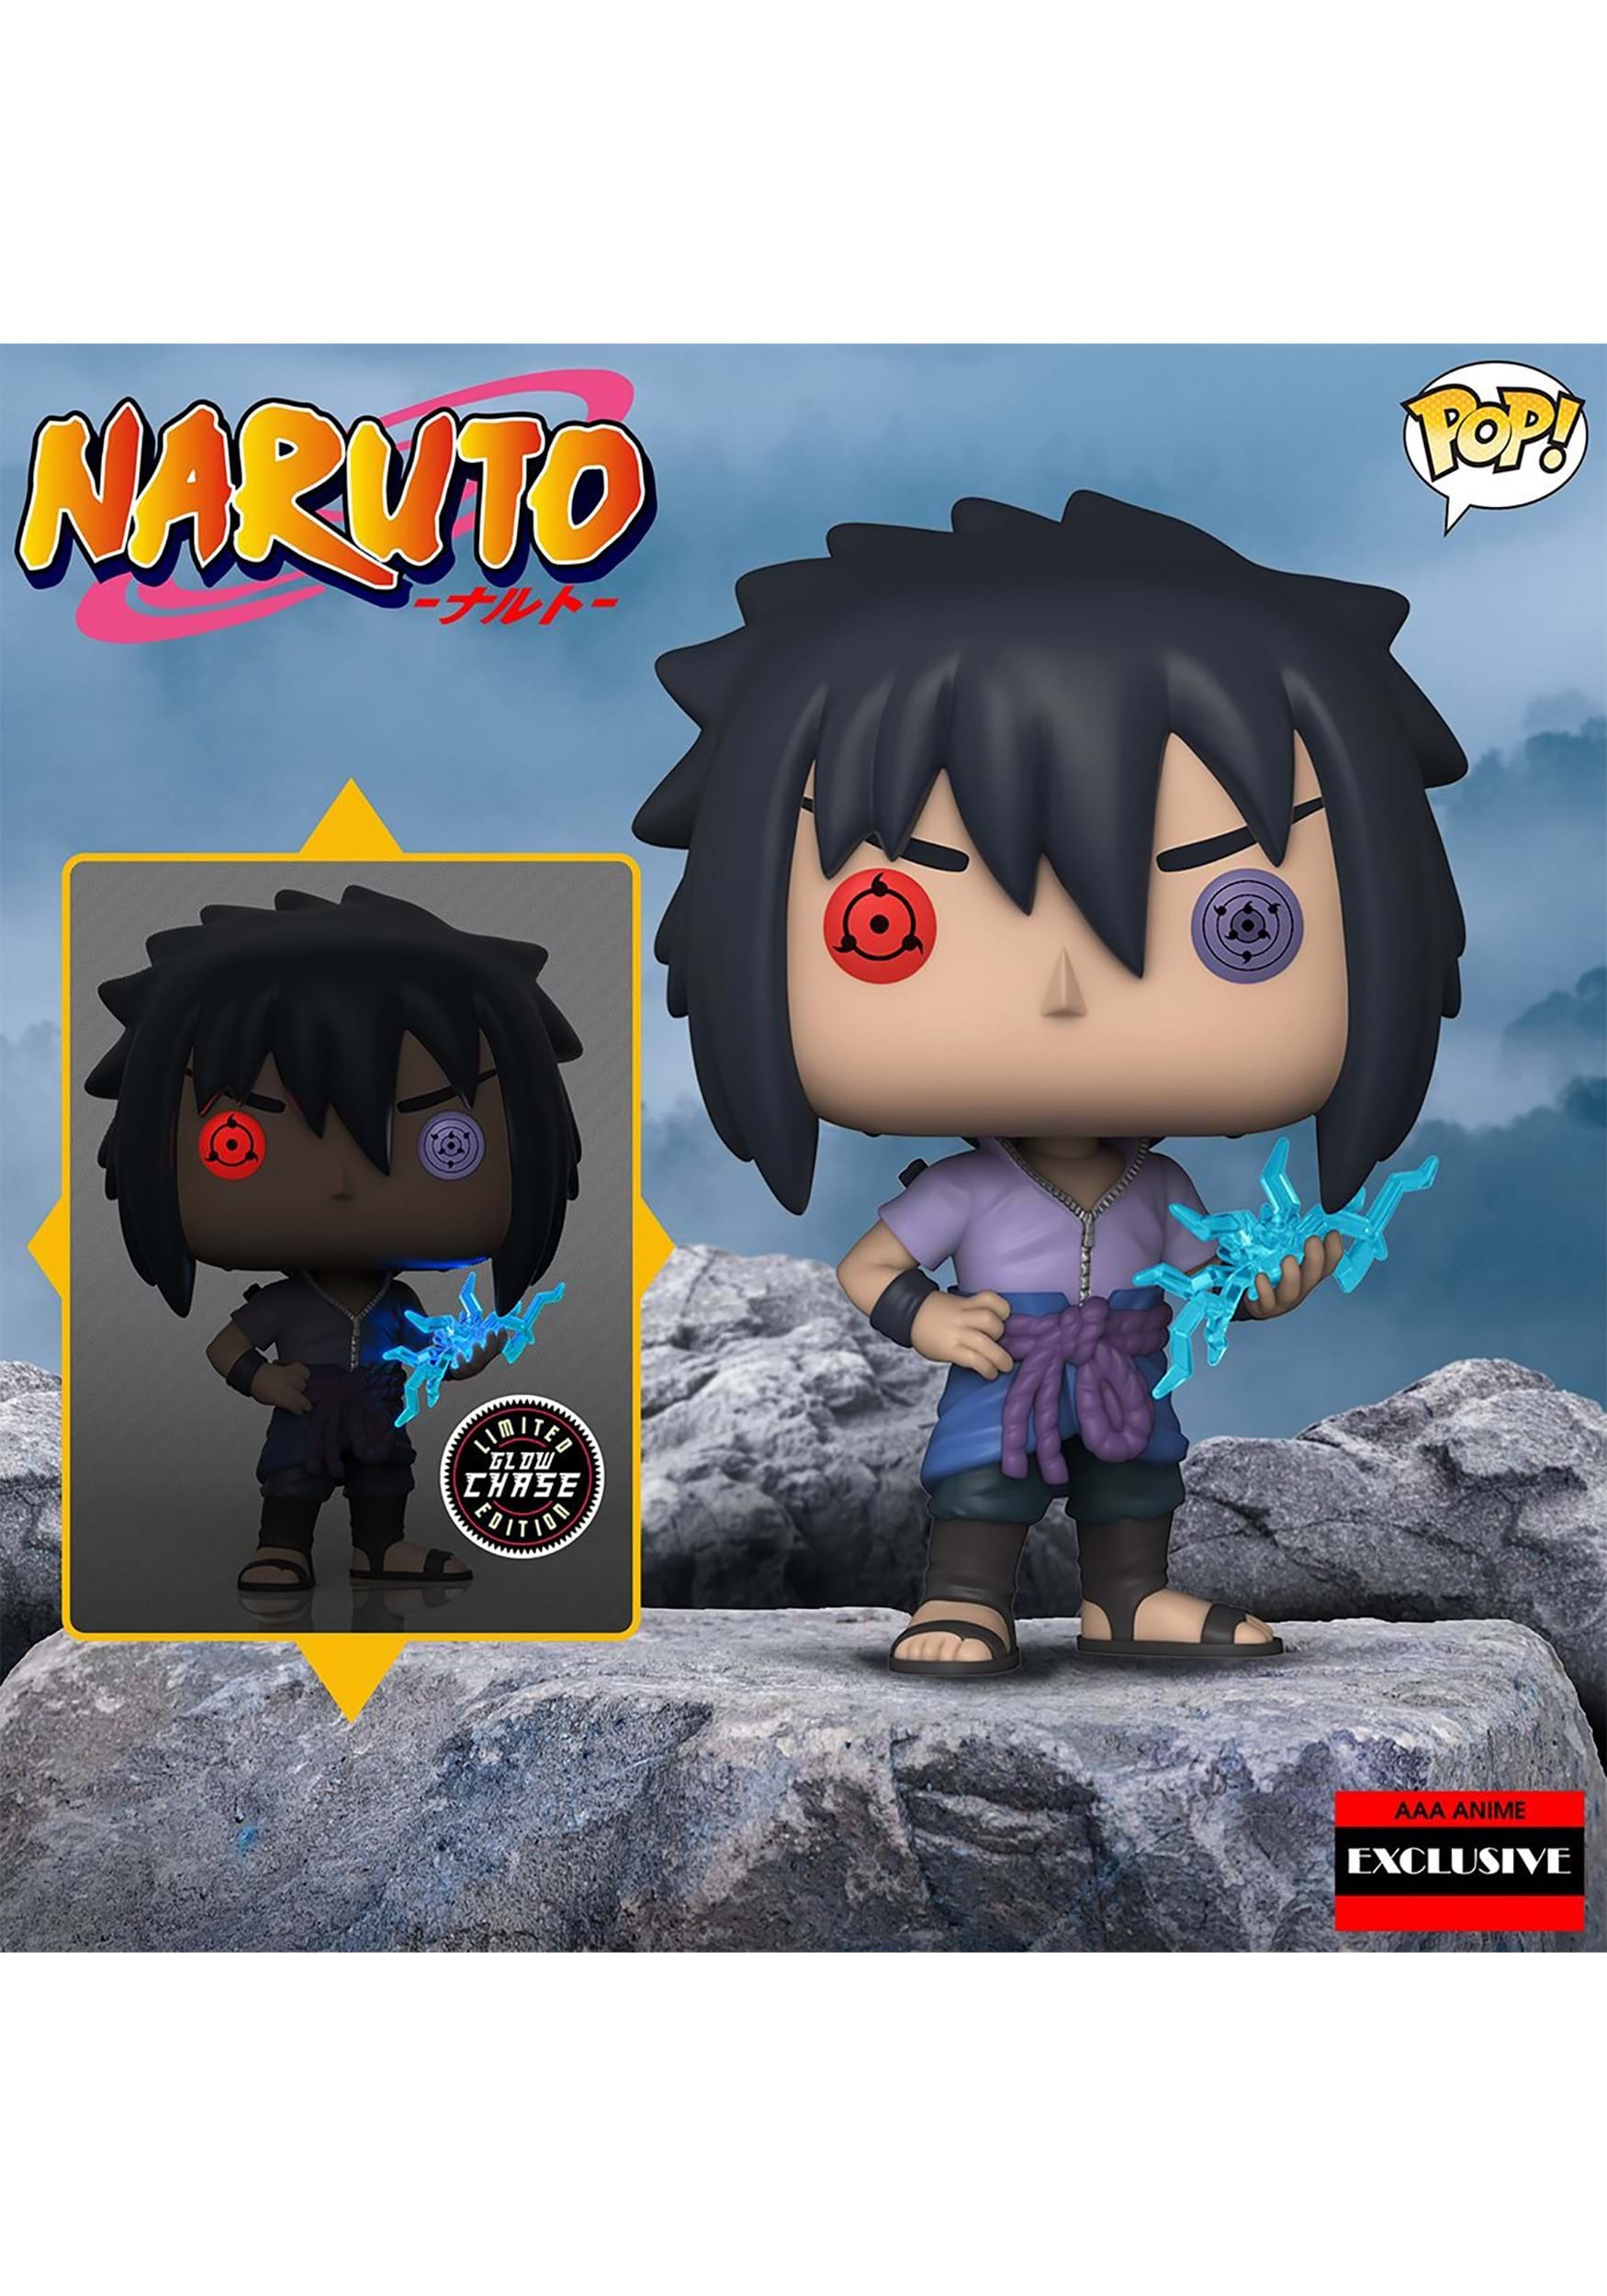 Naruto with rinnegan in galaxy